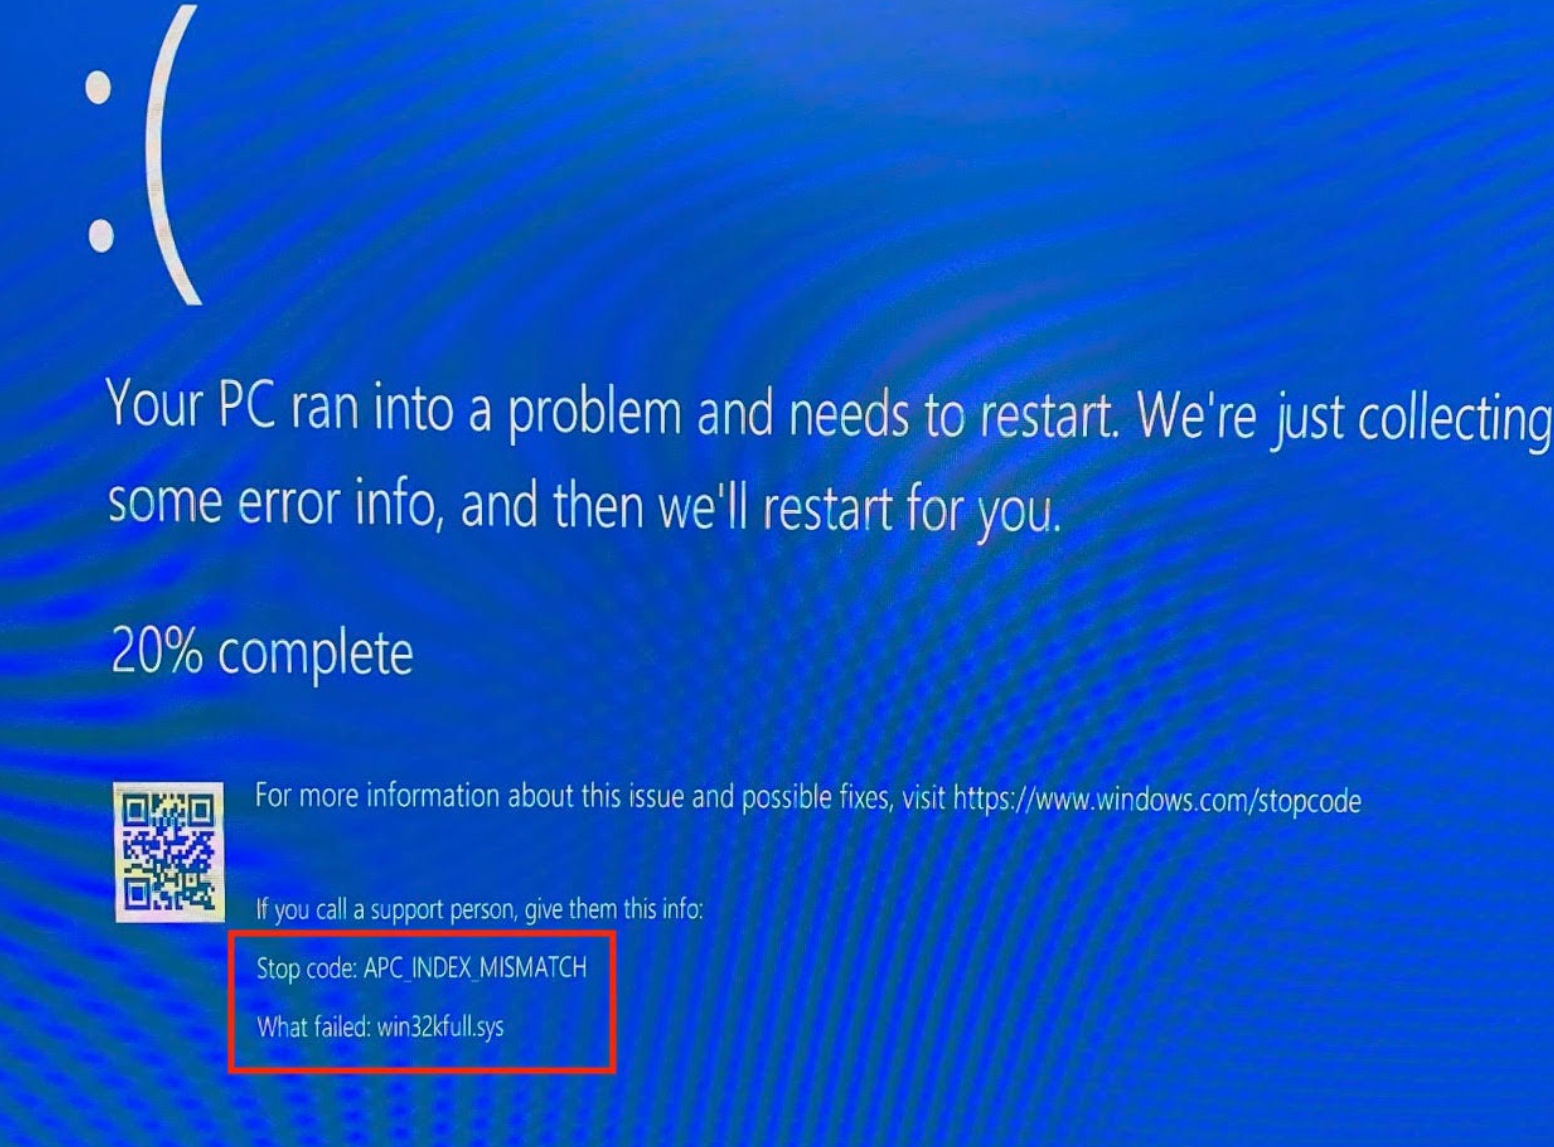 Recent Windows 10 Security Updates May Result in BSOD